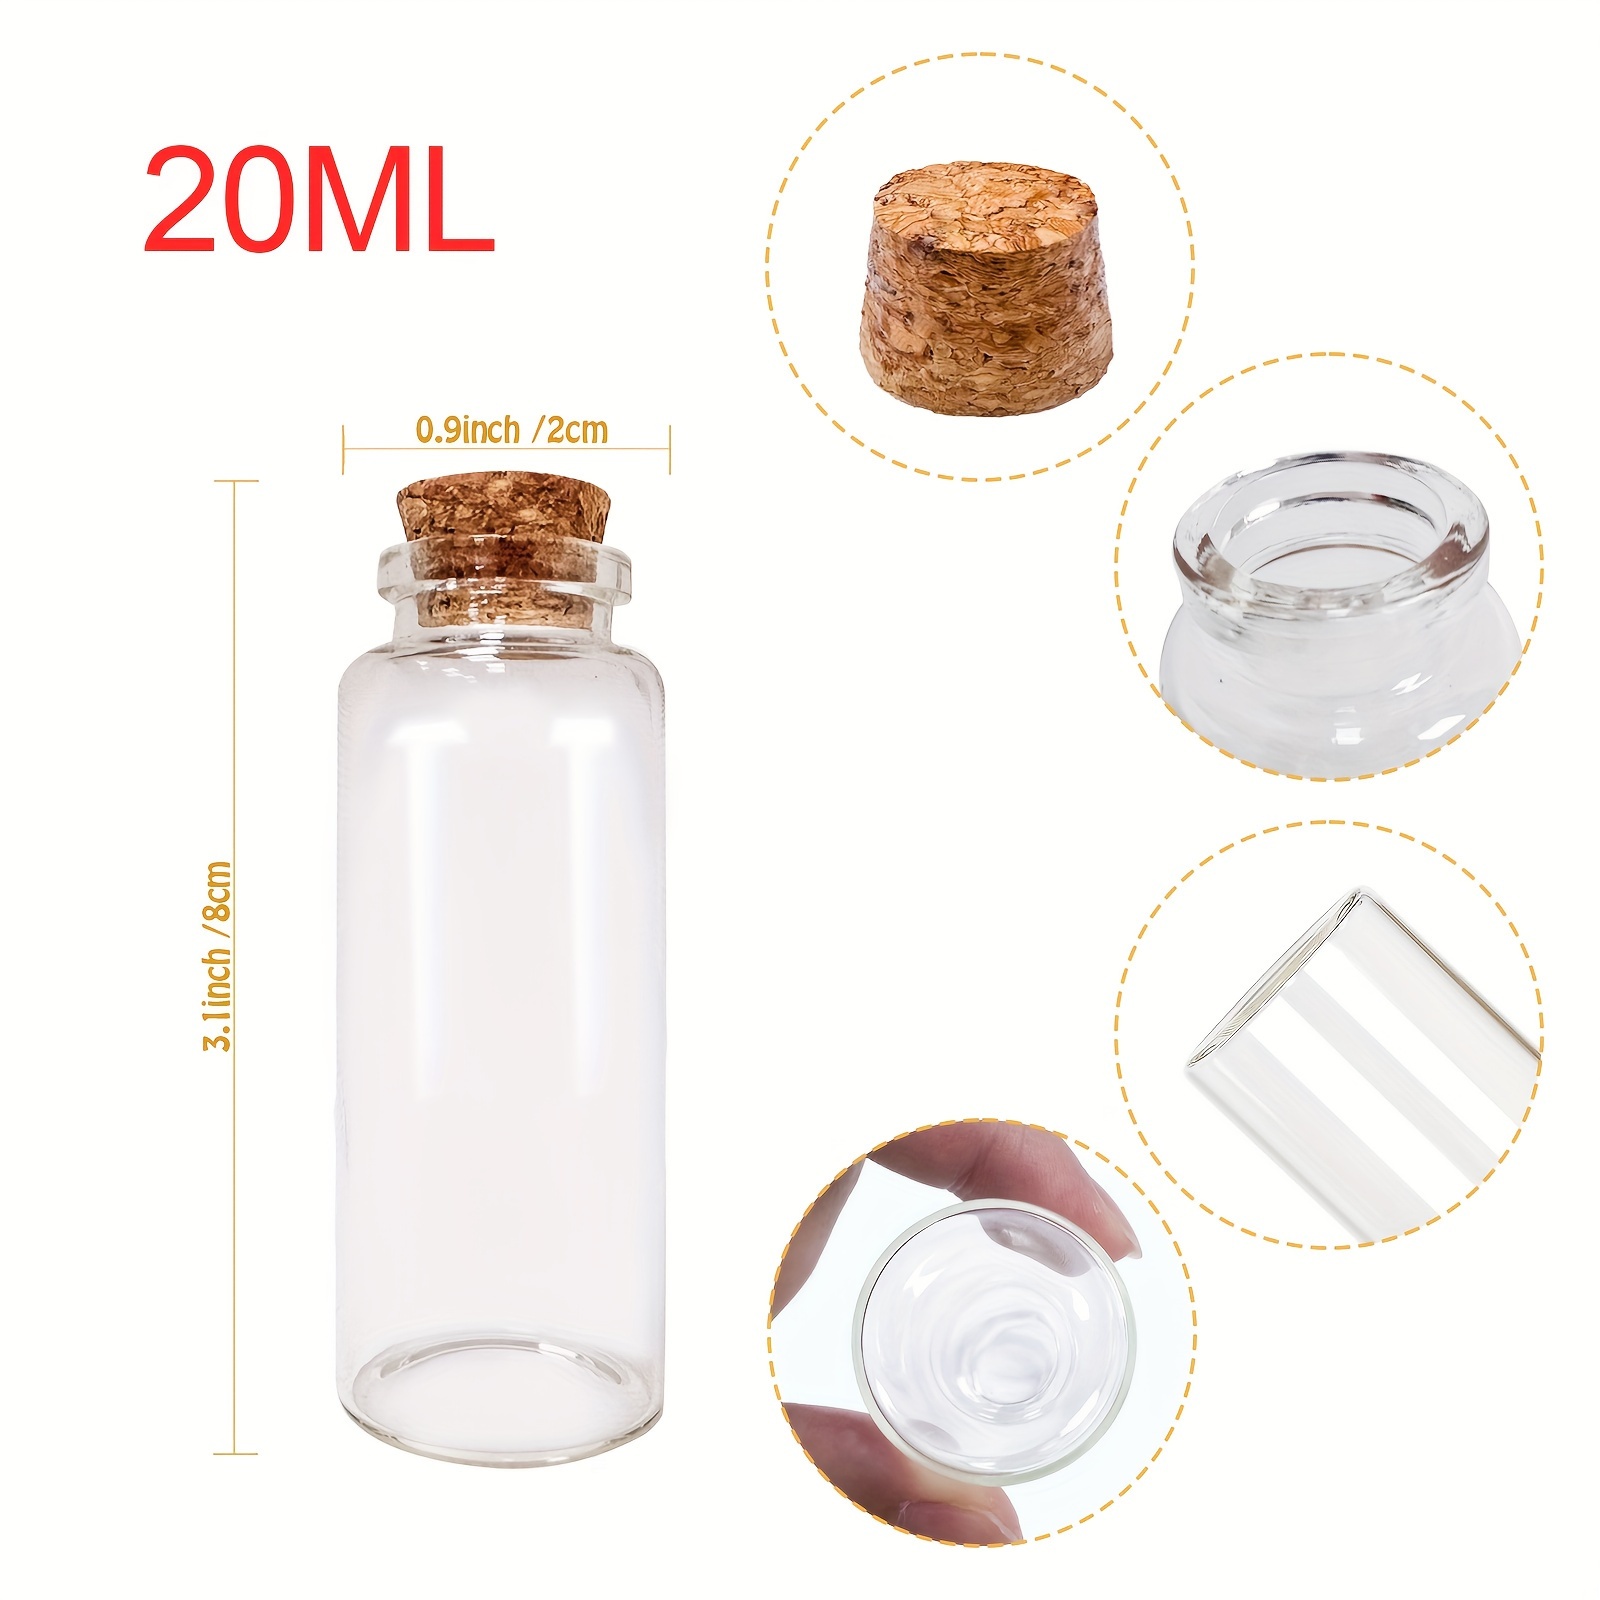 Extra Small Round Decorative Crystal Clear Container